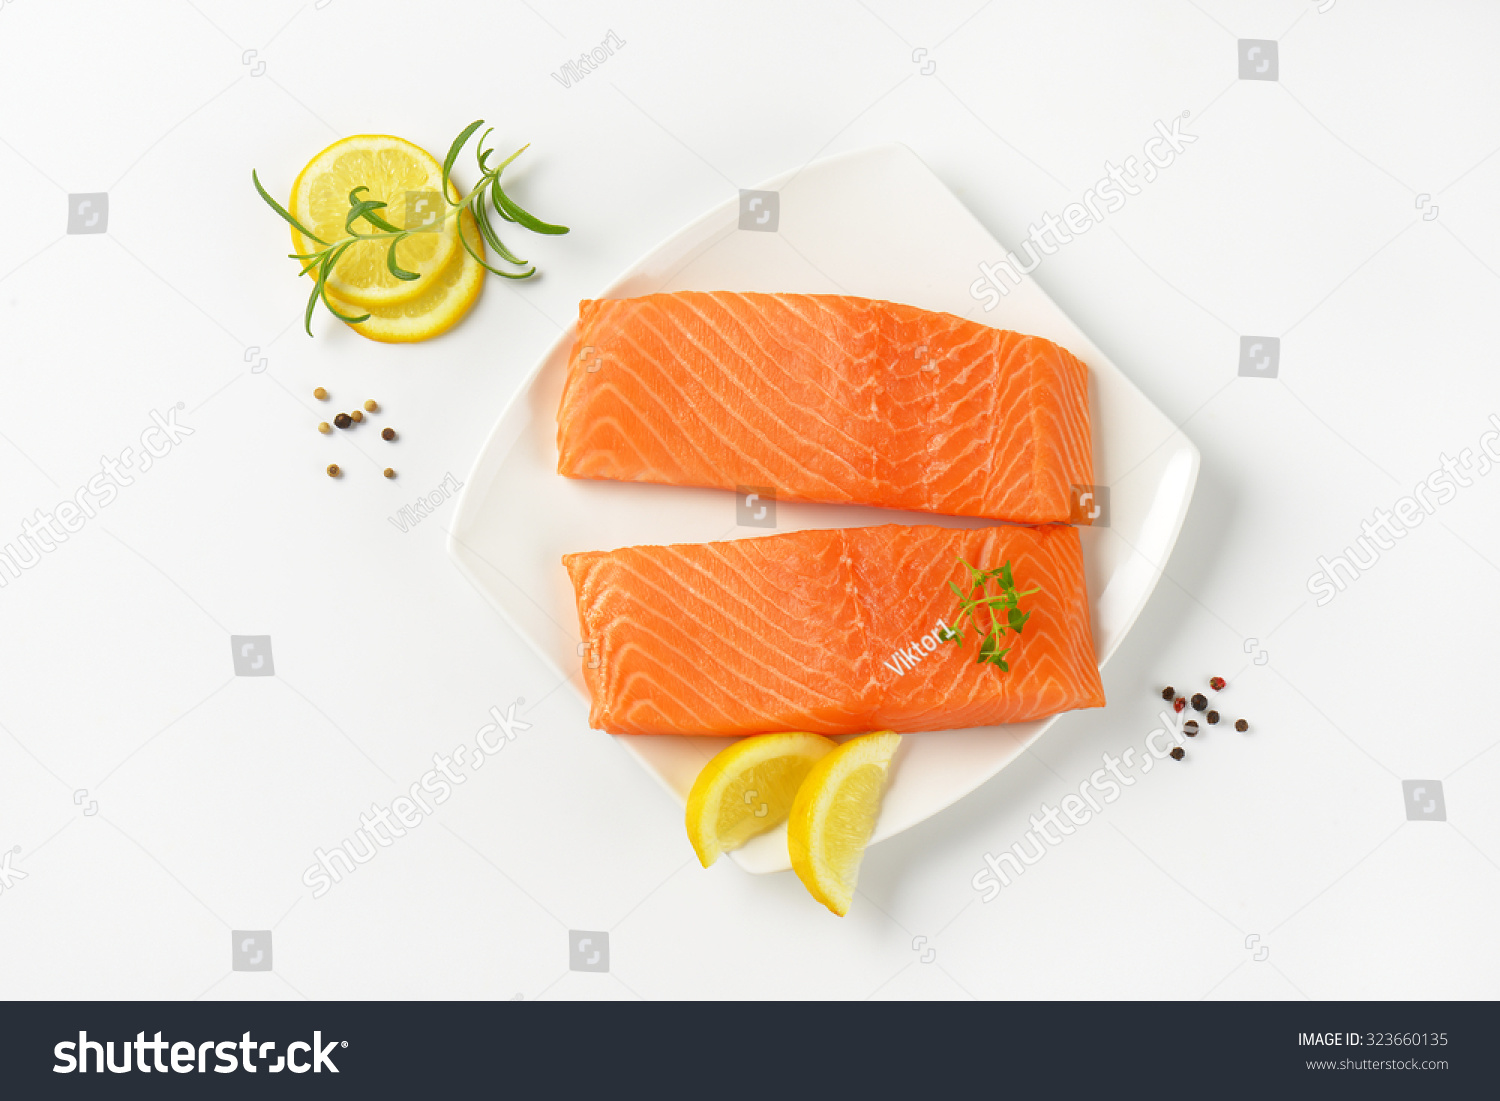 Two Raw Salmon Fillets On White Stock Photo 323660135 | Shutterstock